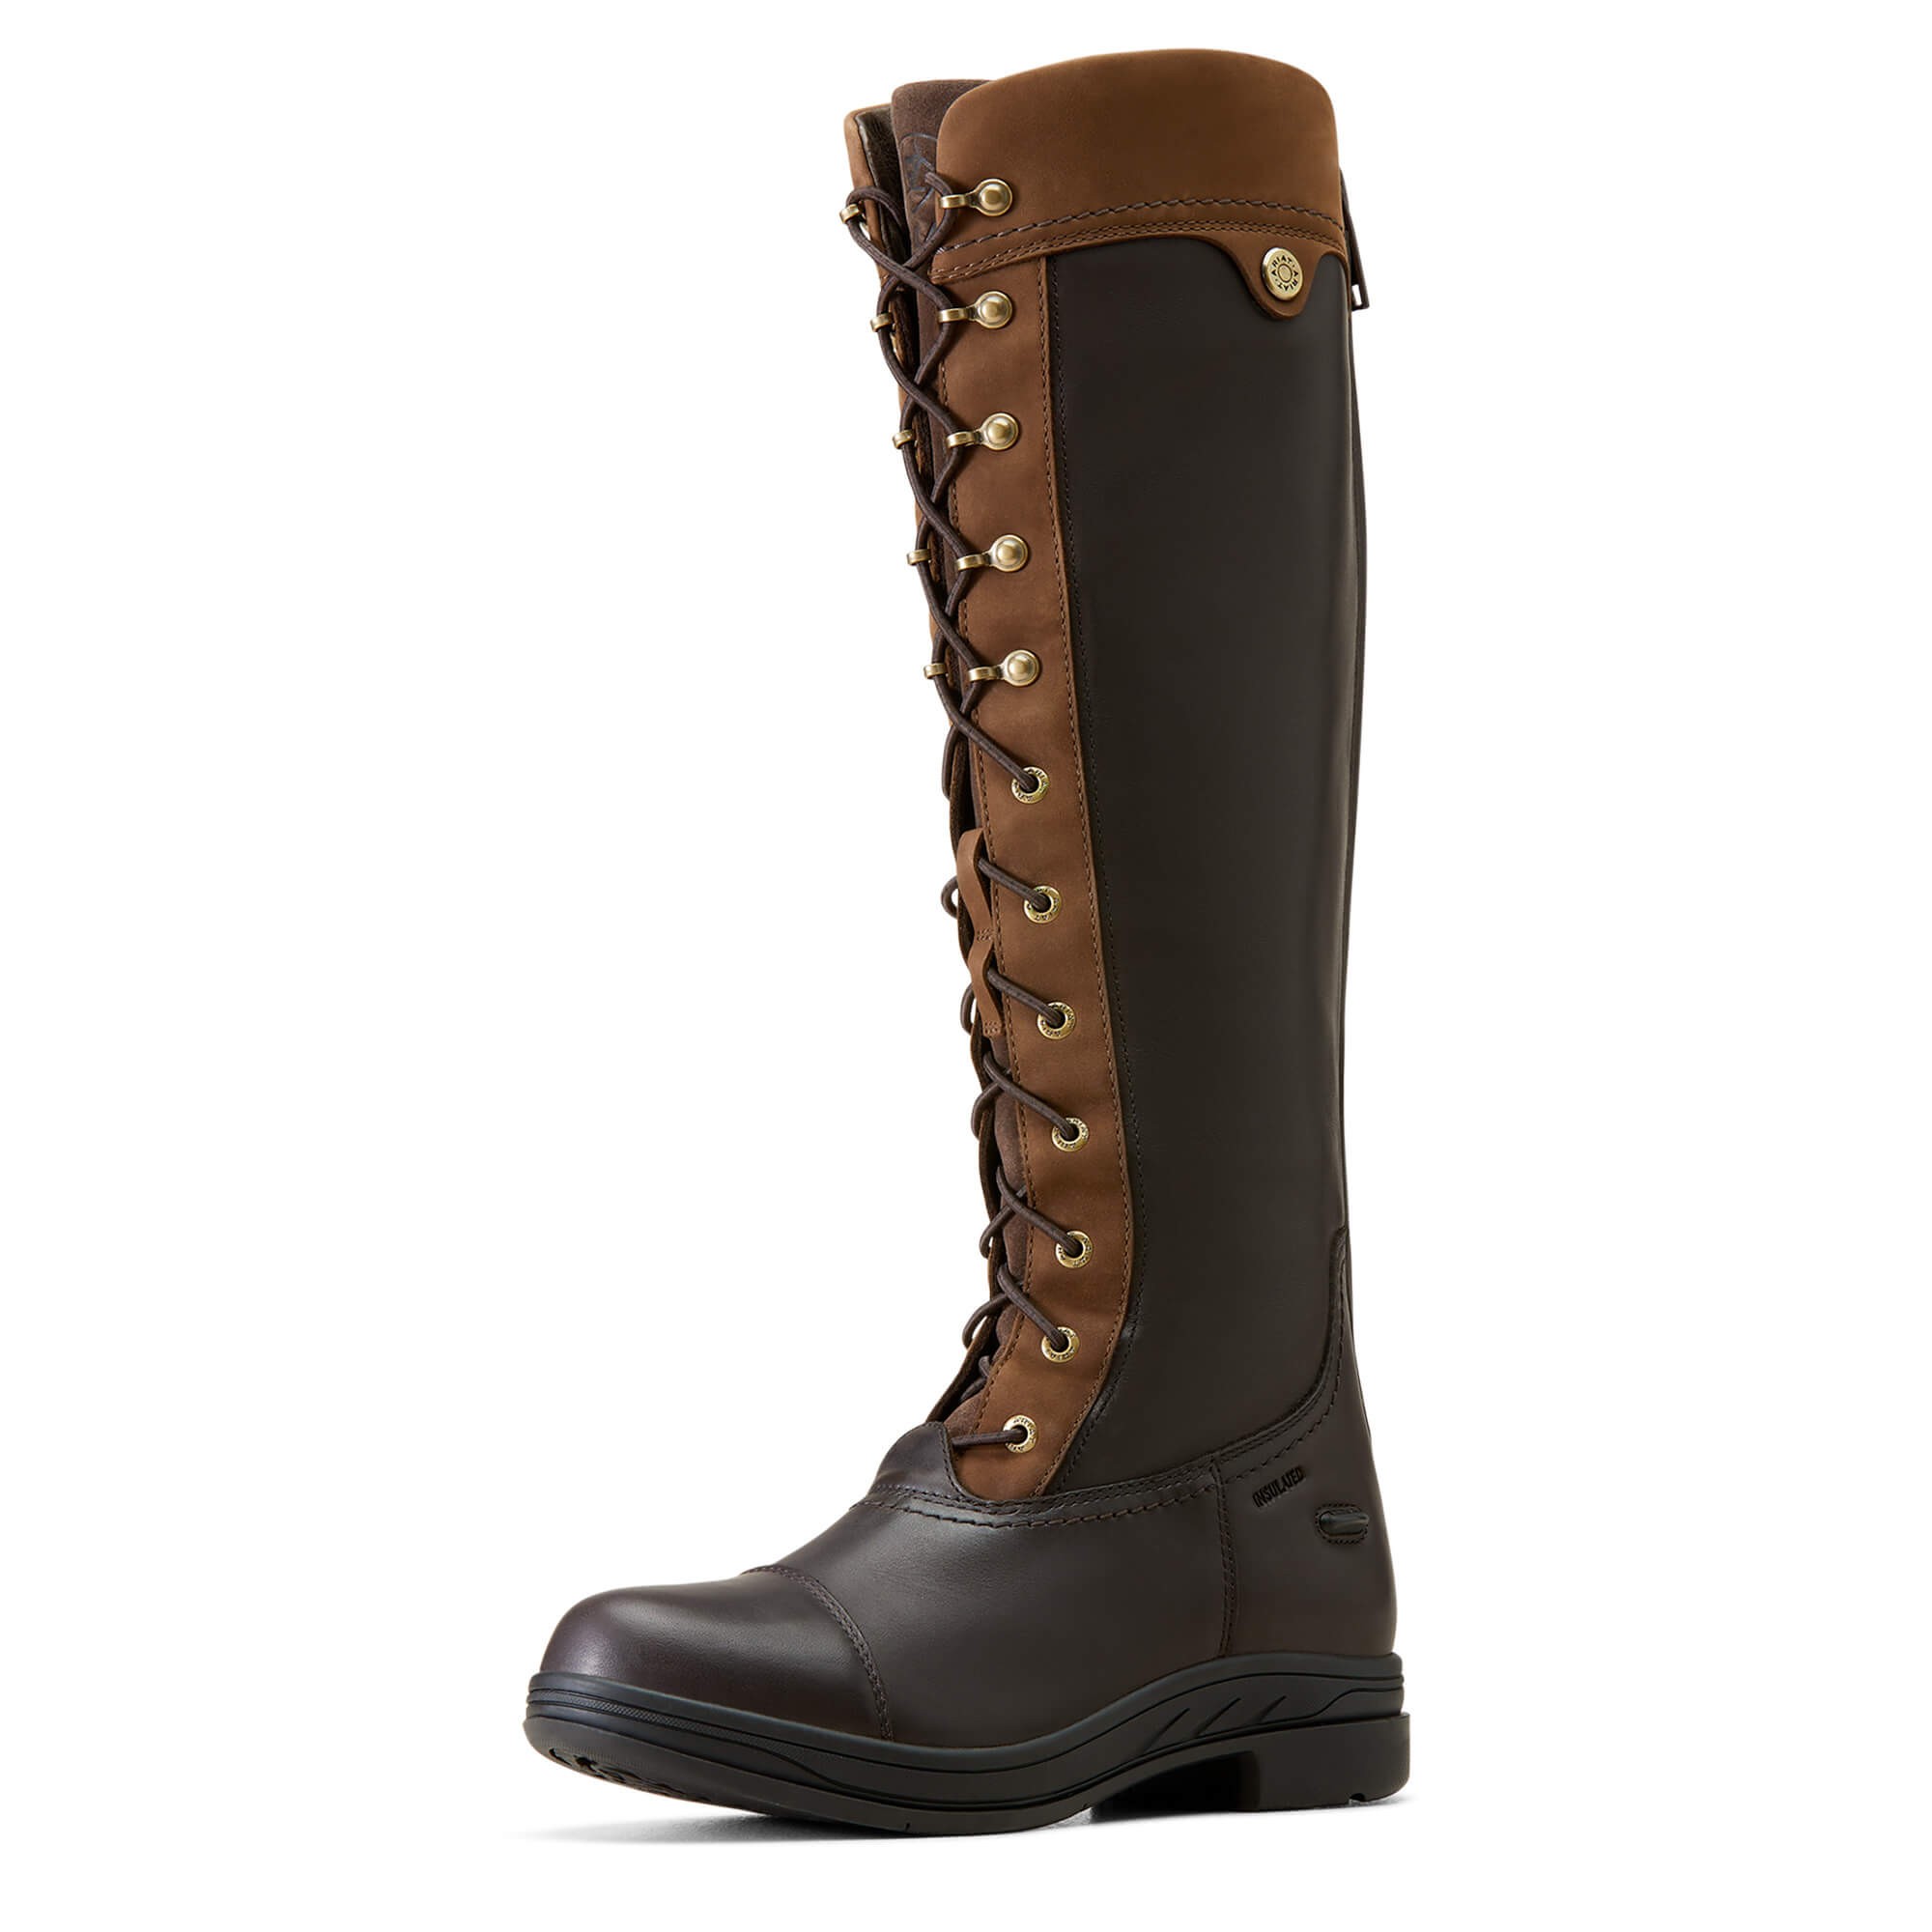 Ariat Women's Coniston Max H20 Insulated Boots (Ebony) - Old Dairy Saddlery